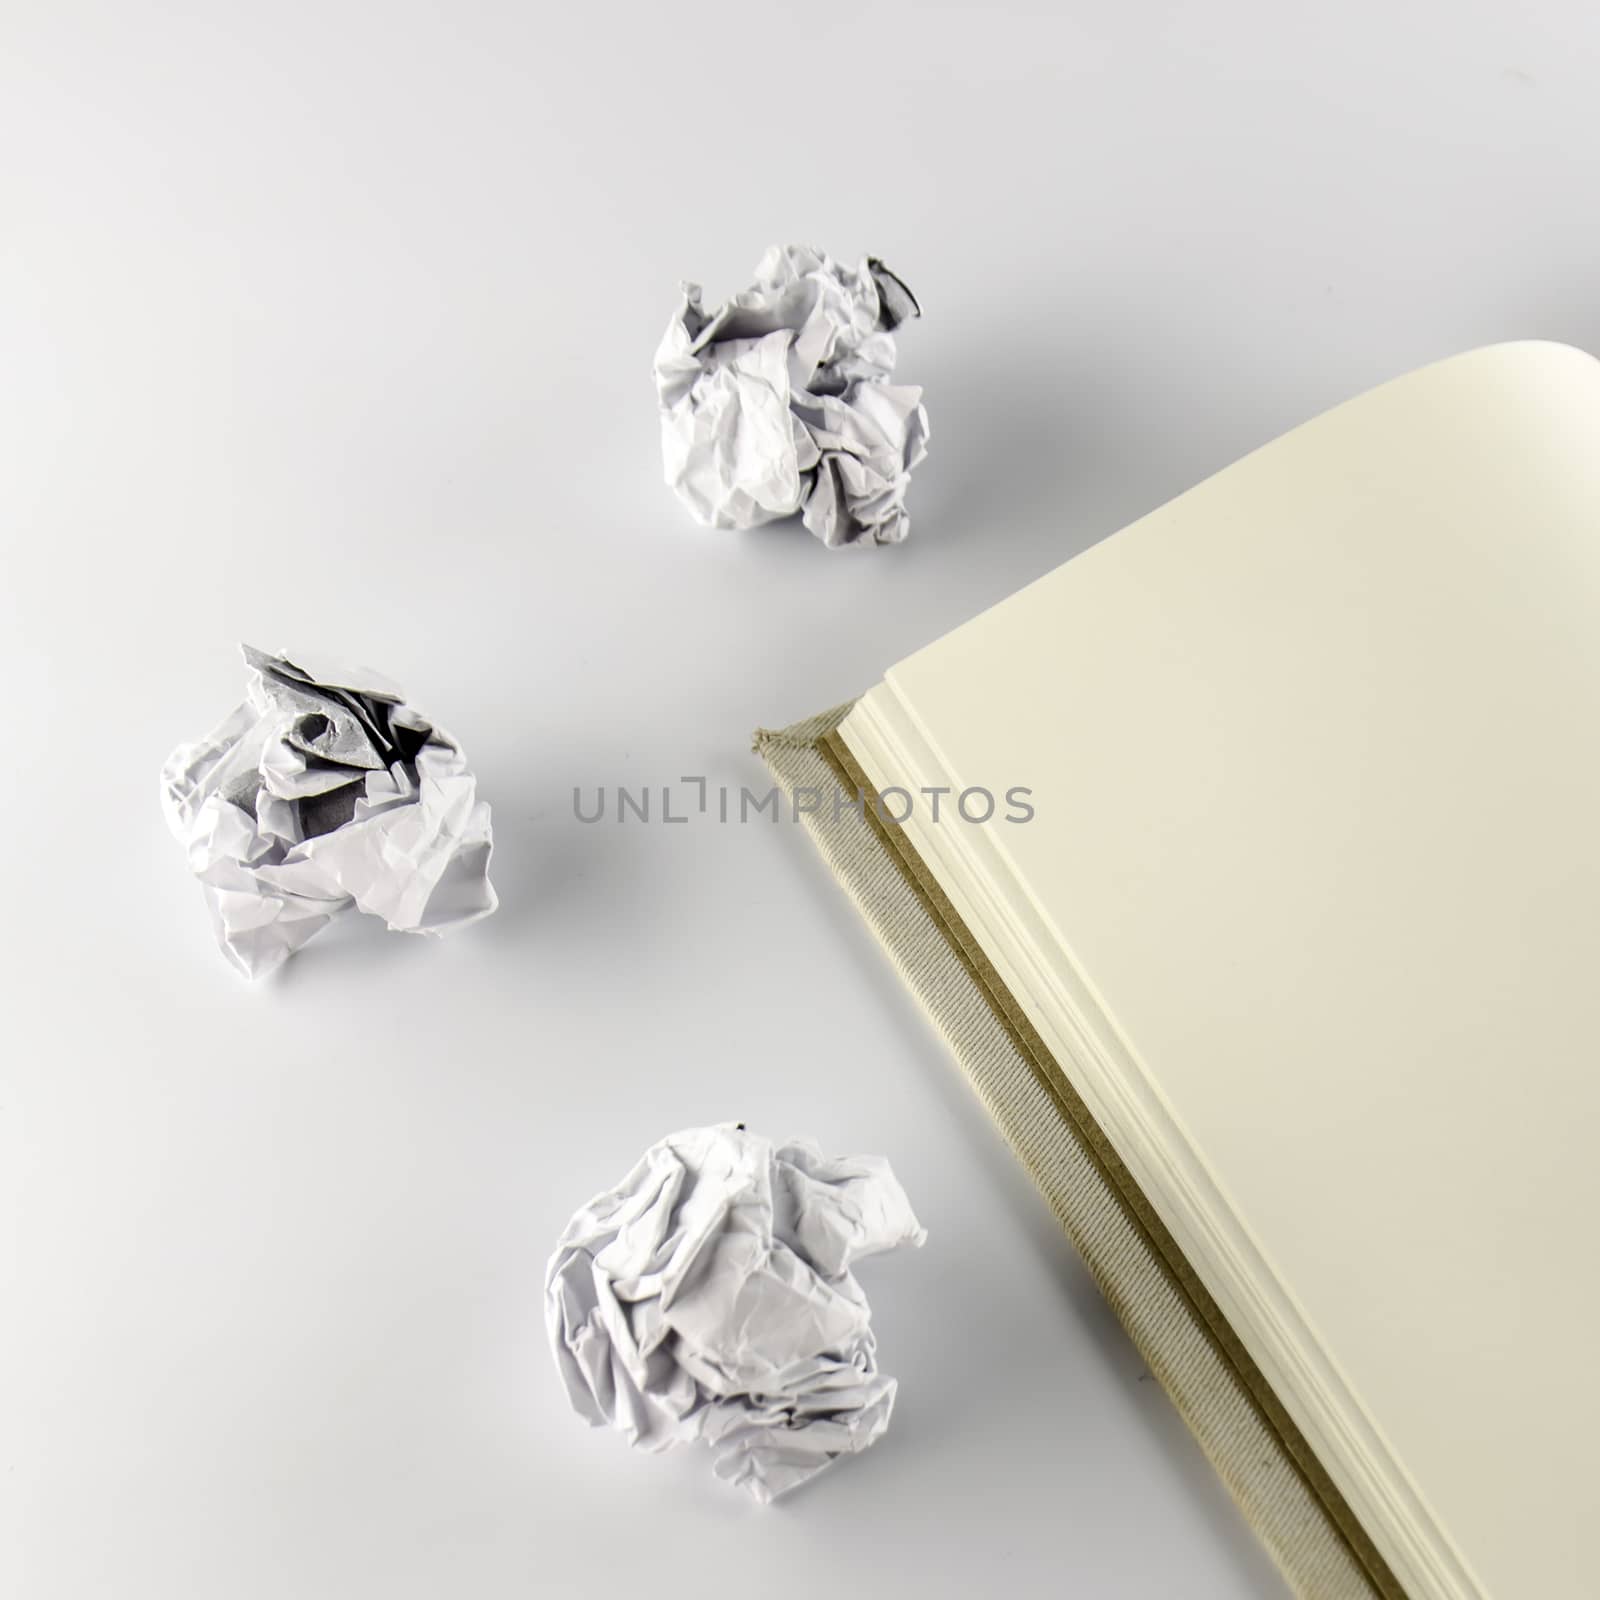 crumpled paper and notebook on a white background